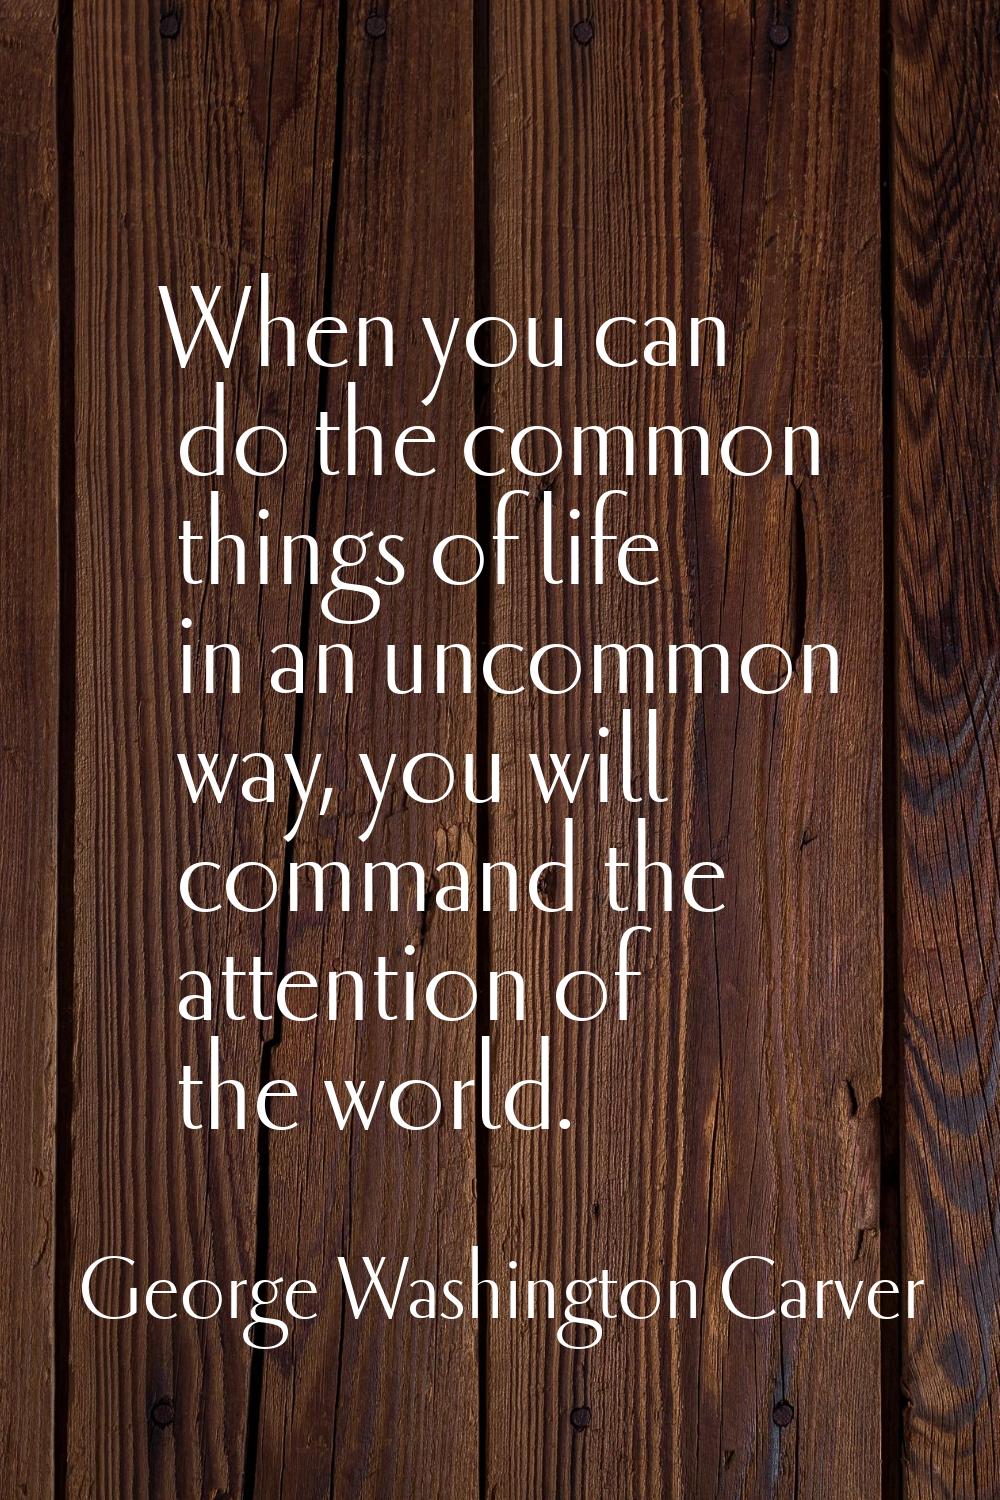 When you can do the common things of life in an uncommon way, you will command the attention of the